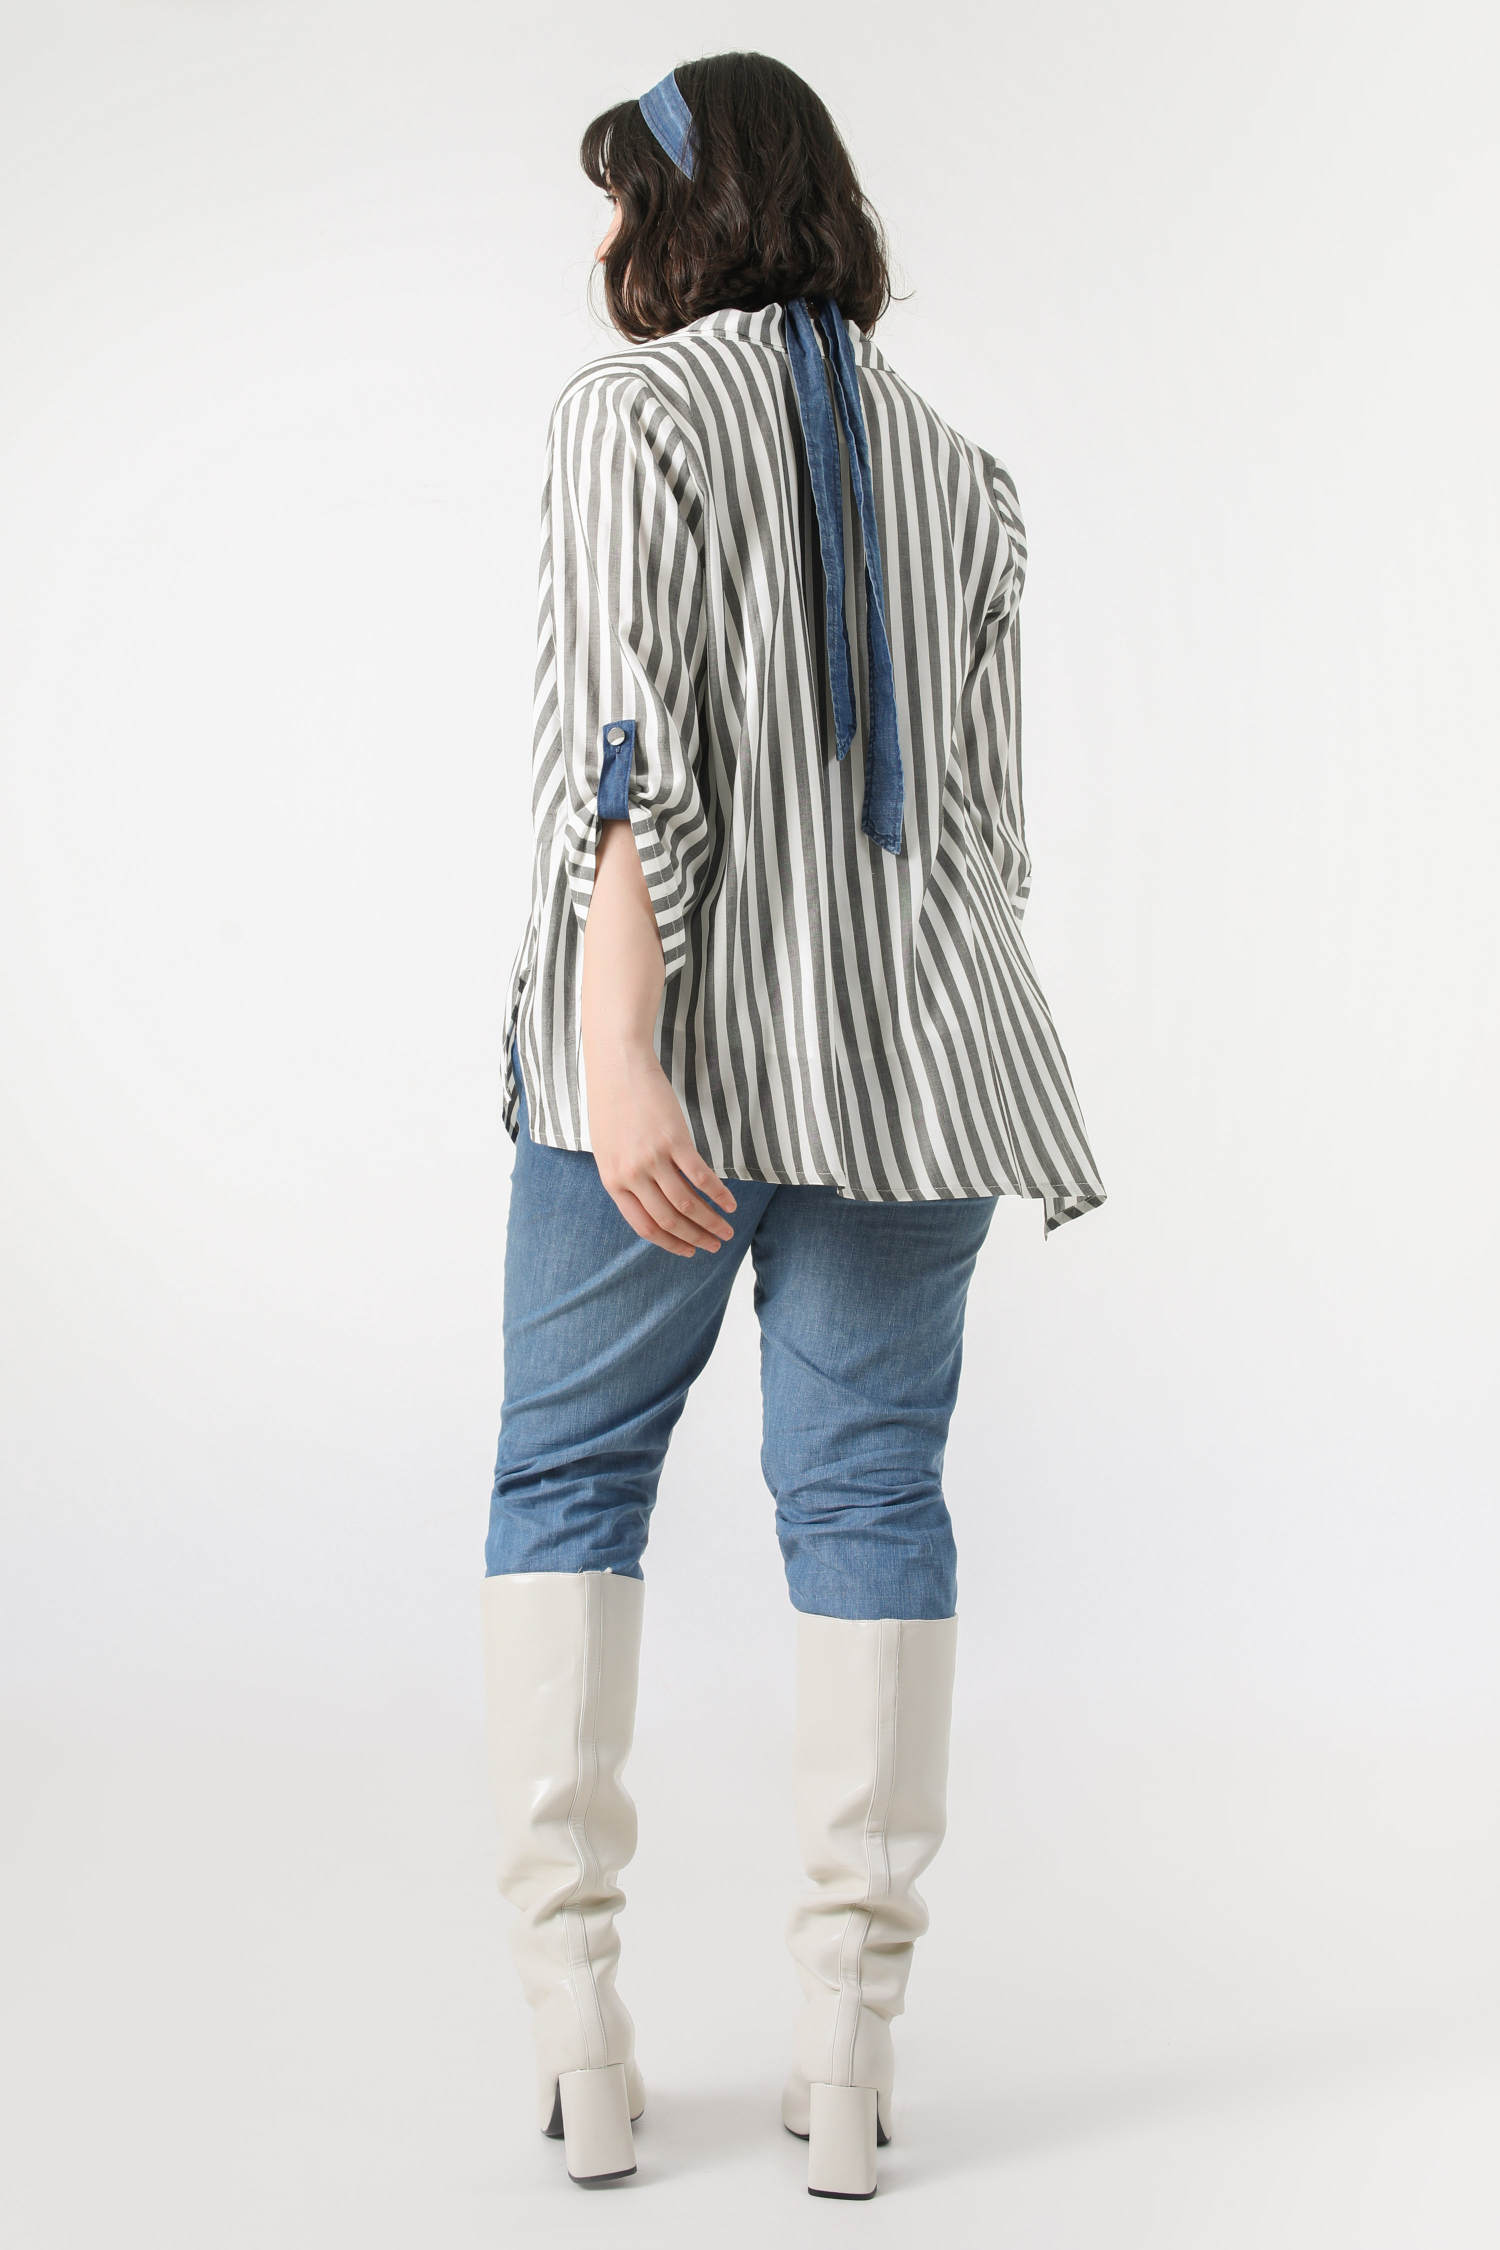 Shirt with striped pattern